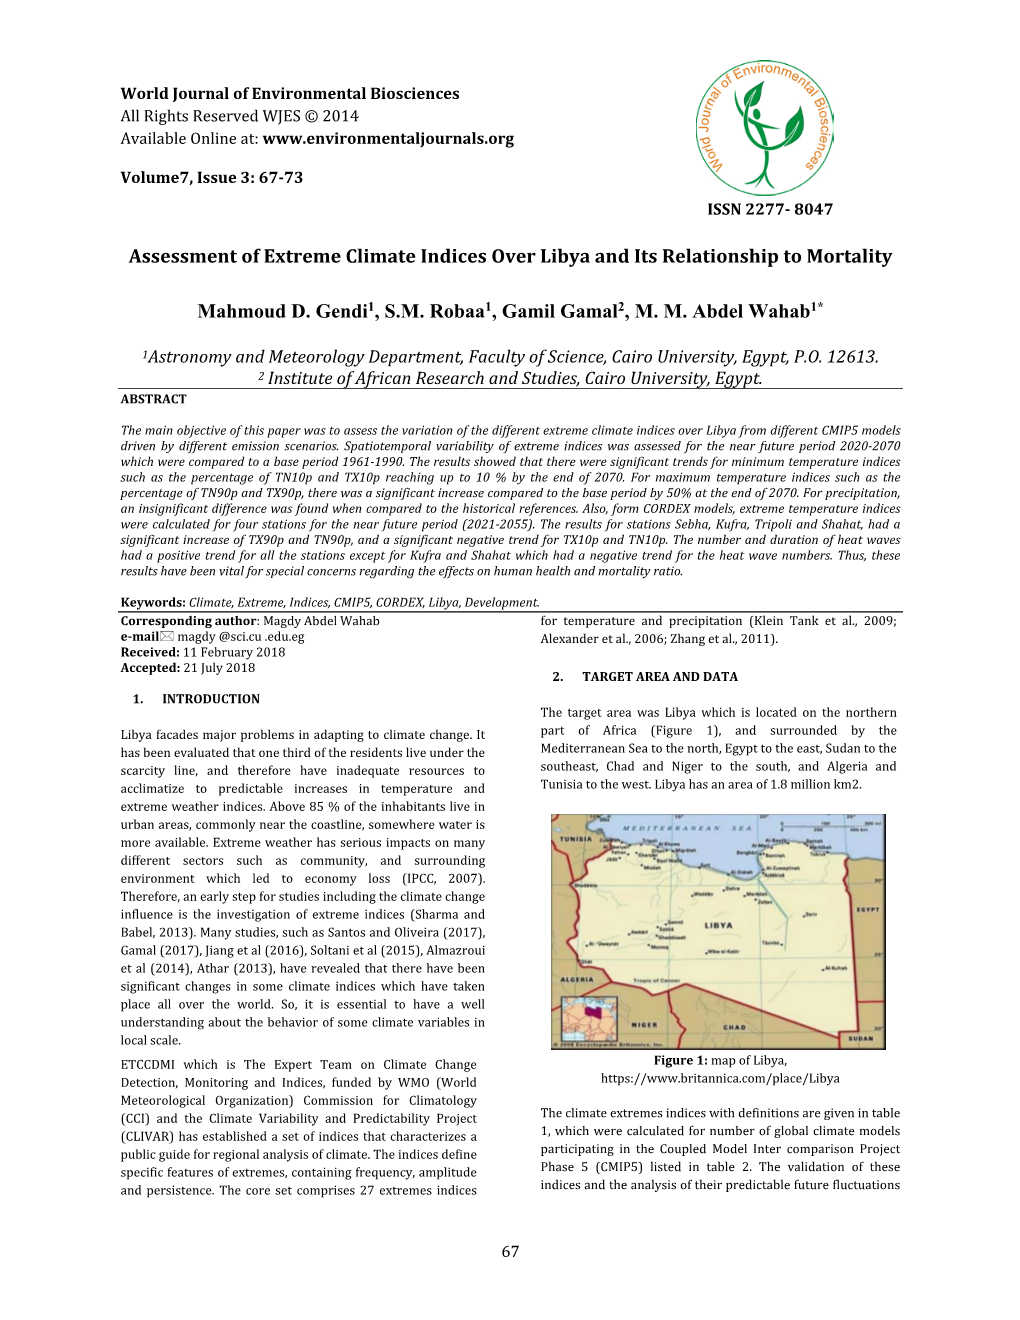 Assessment of Extreme Climate Indices Over Libya and Its Relationship to Mortality